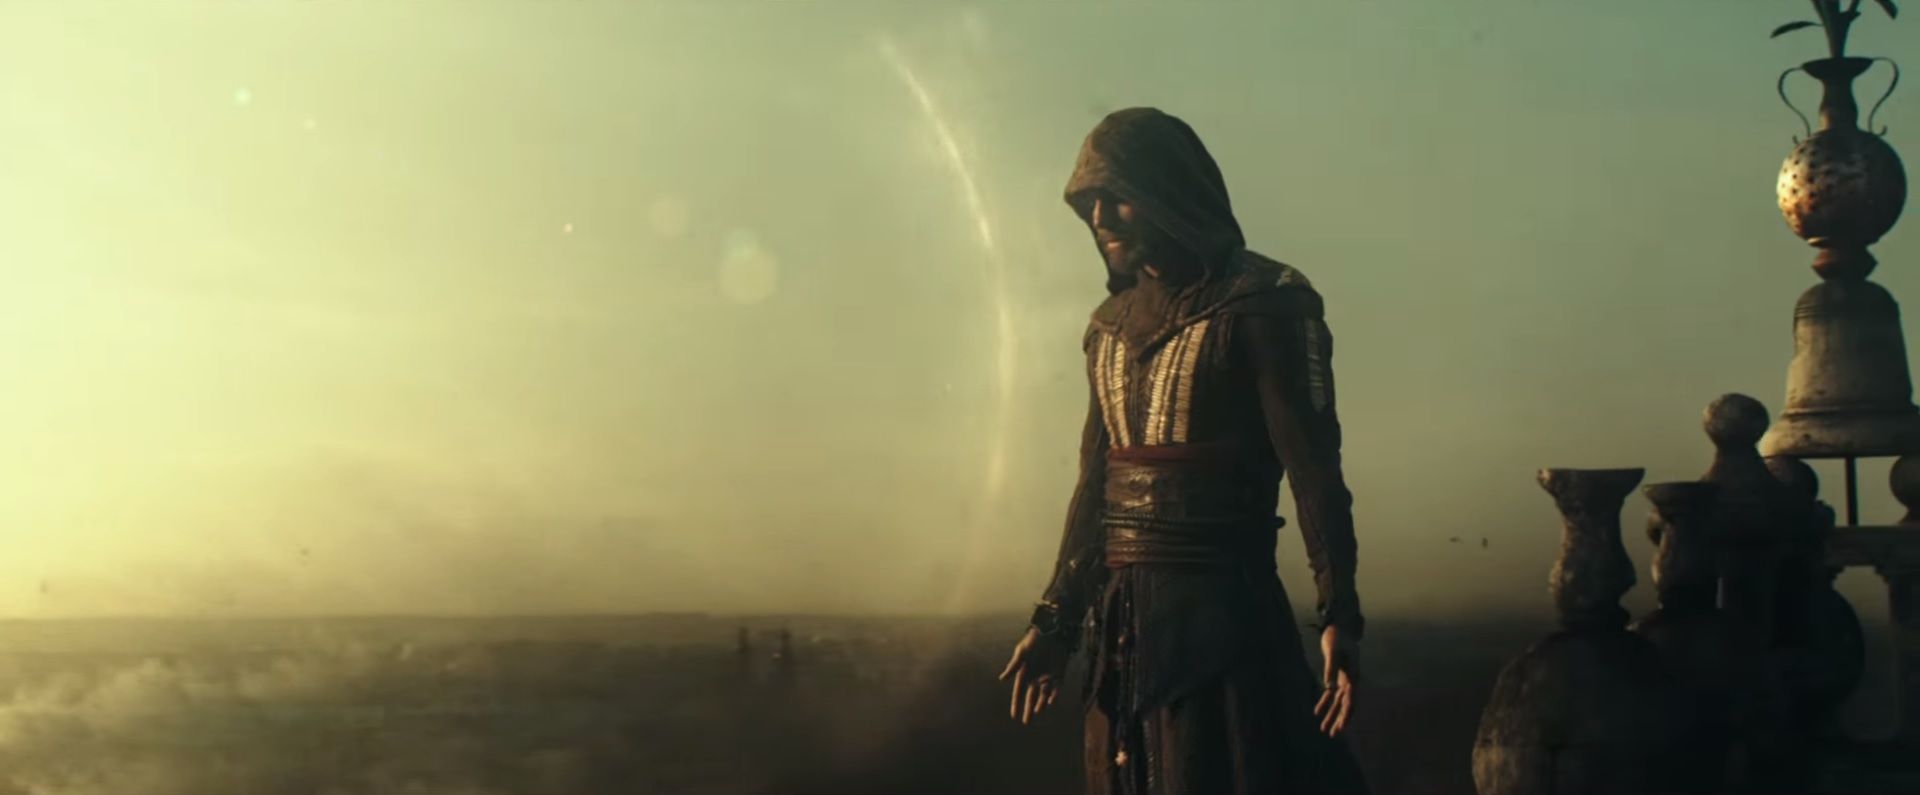 Assassin's Creed trailer - Aguilar on rooftops